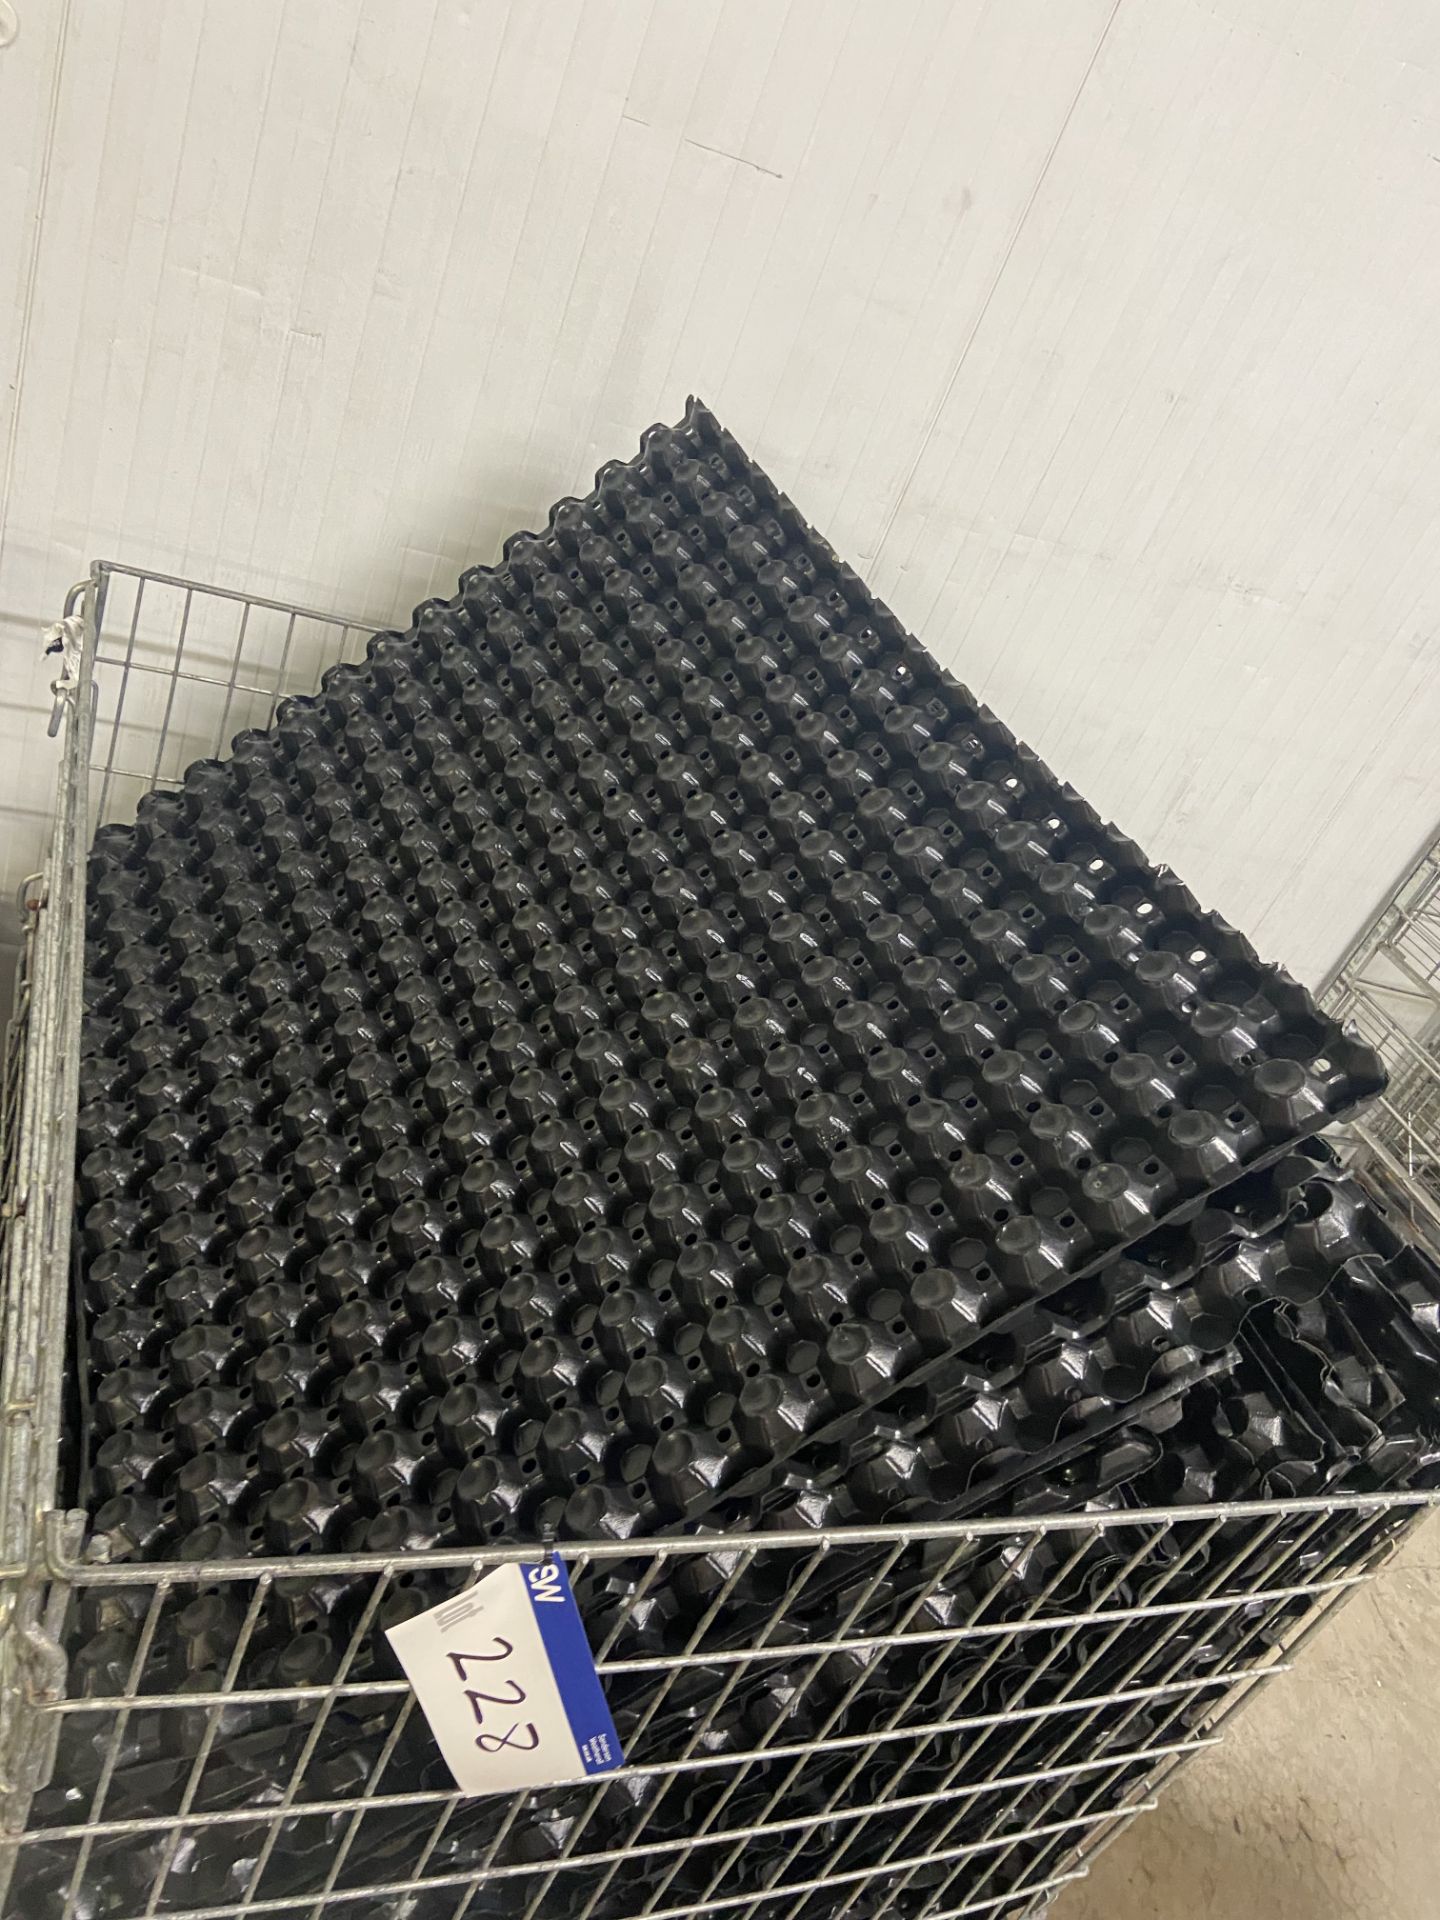 Galvanised Steel Collapsible Cage Box Pallet, approx. 1.2m x 1m x approx. 800mm deep, with plastic - Image 2 of 2